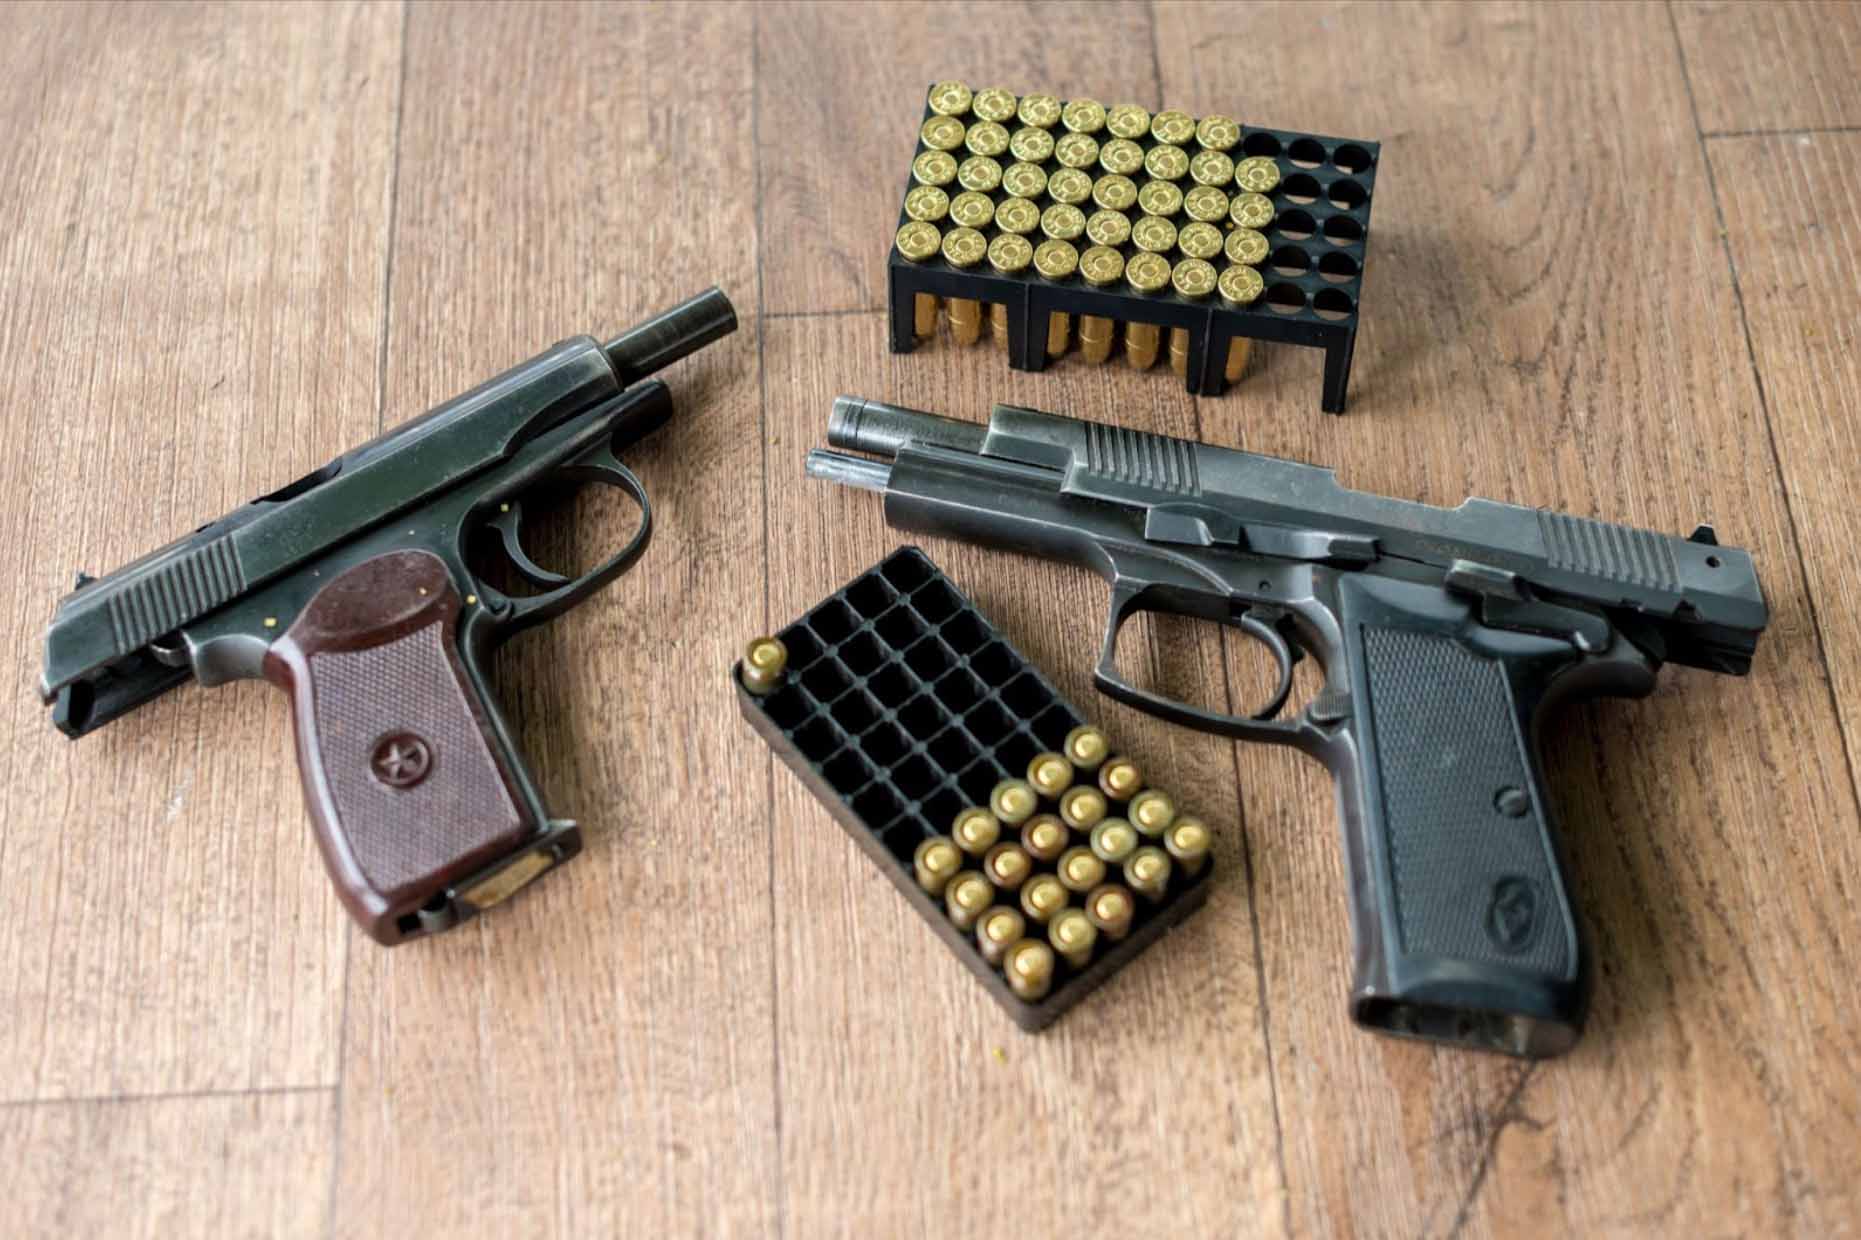 Two pistols and two ammunition packs neatly arranged on a wooden table.